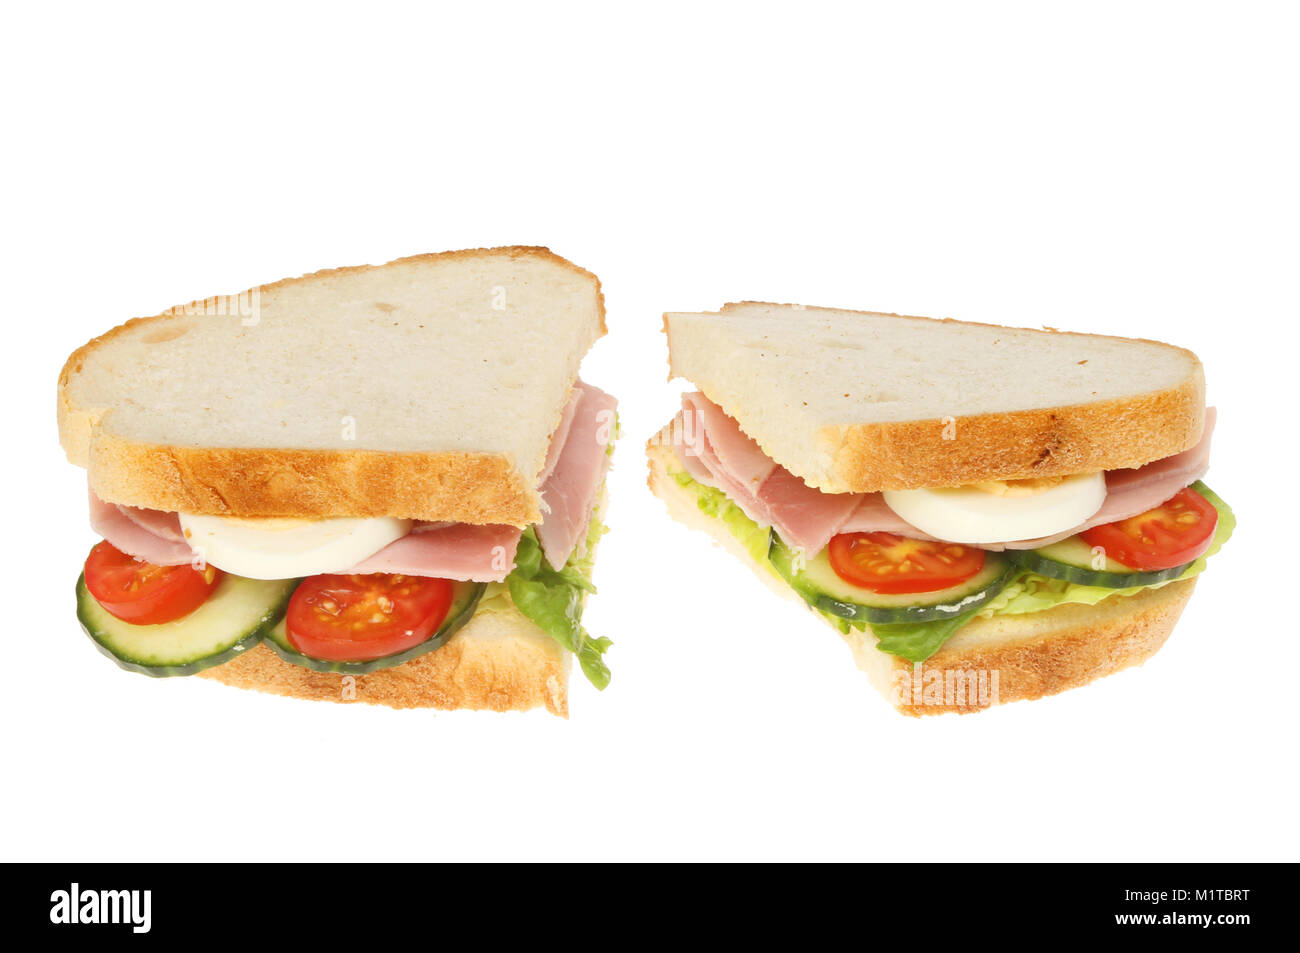 Ham, egg and sald sandwiches isolated against white Stock Photo